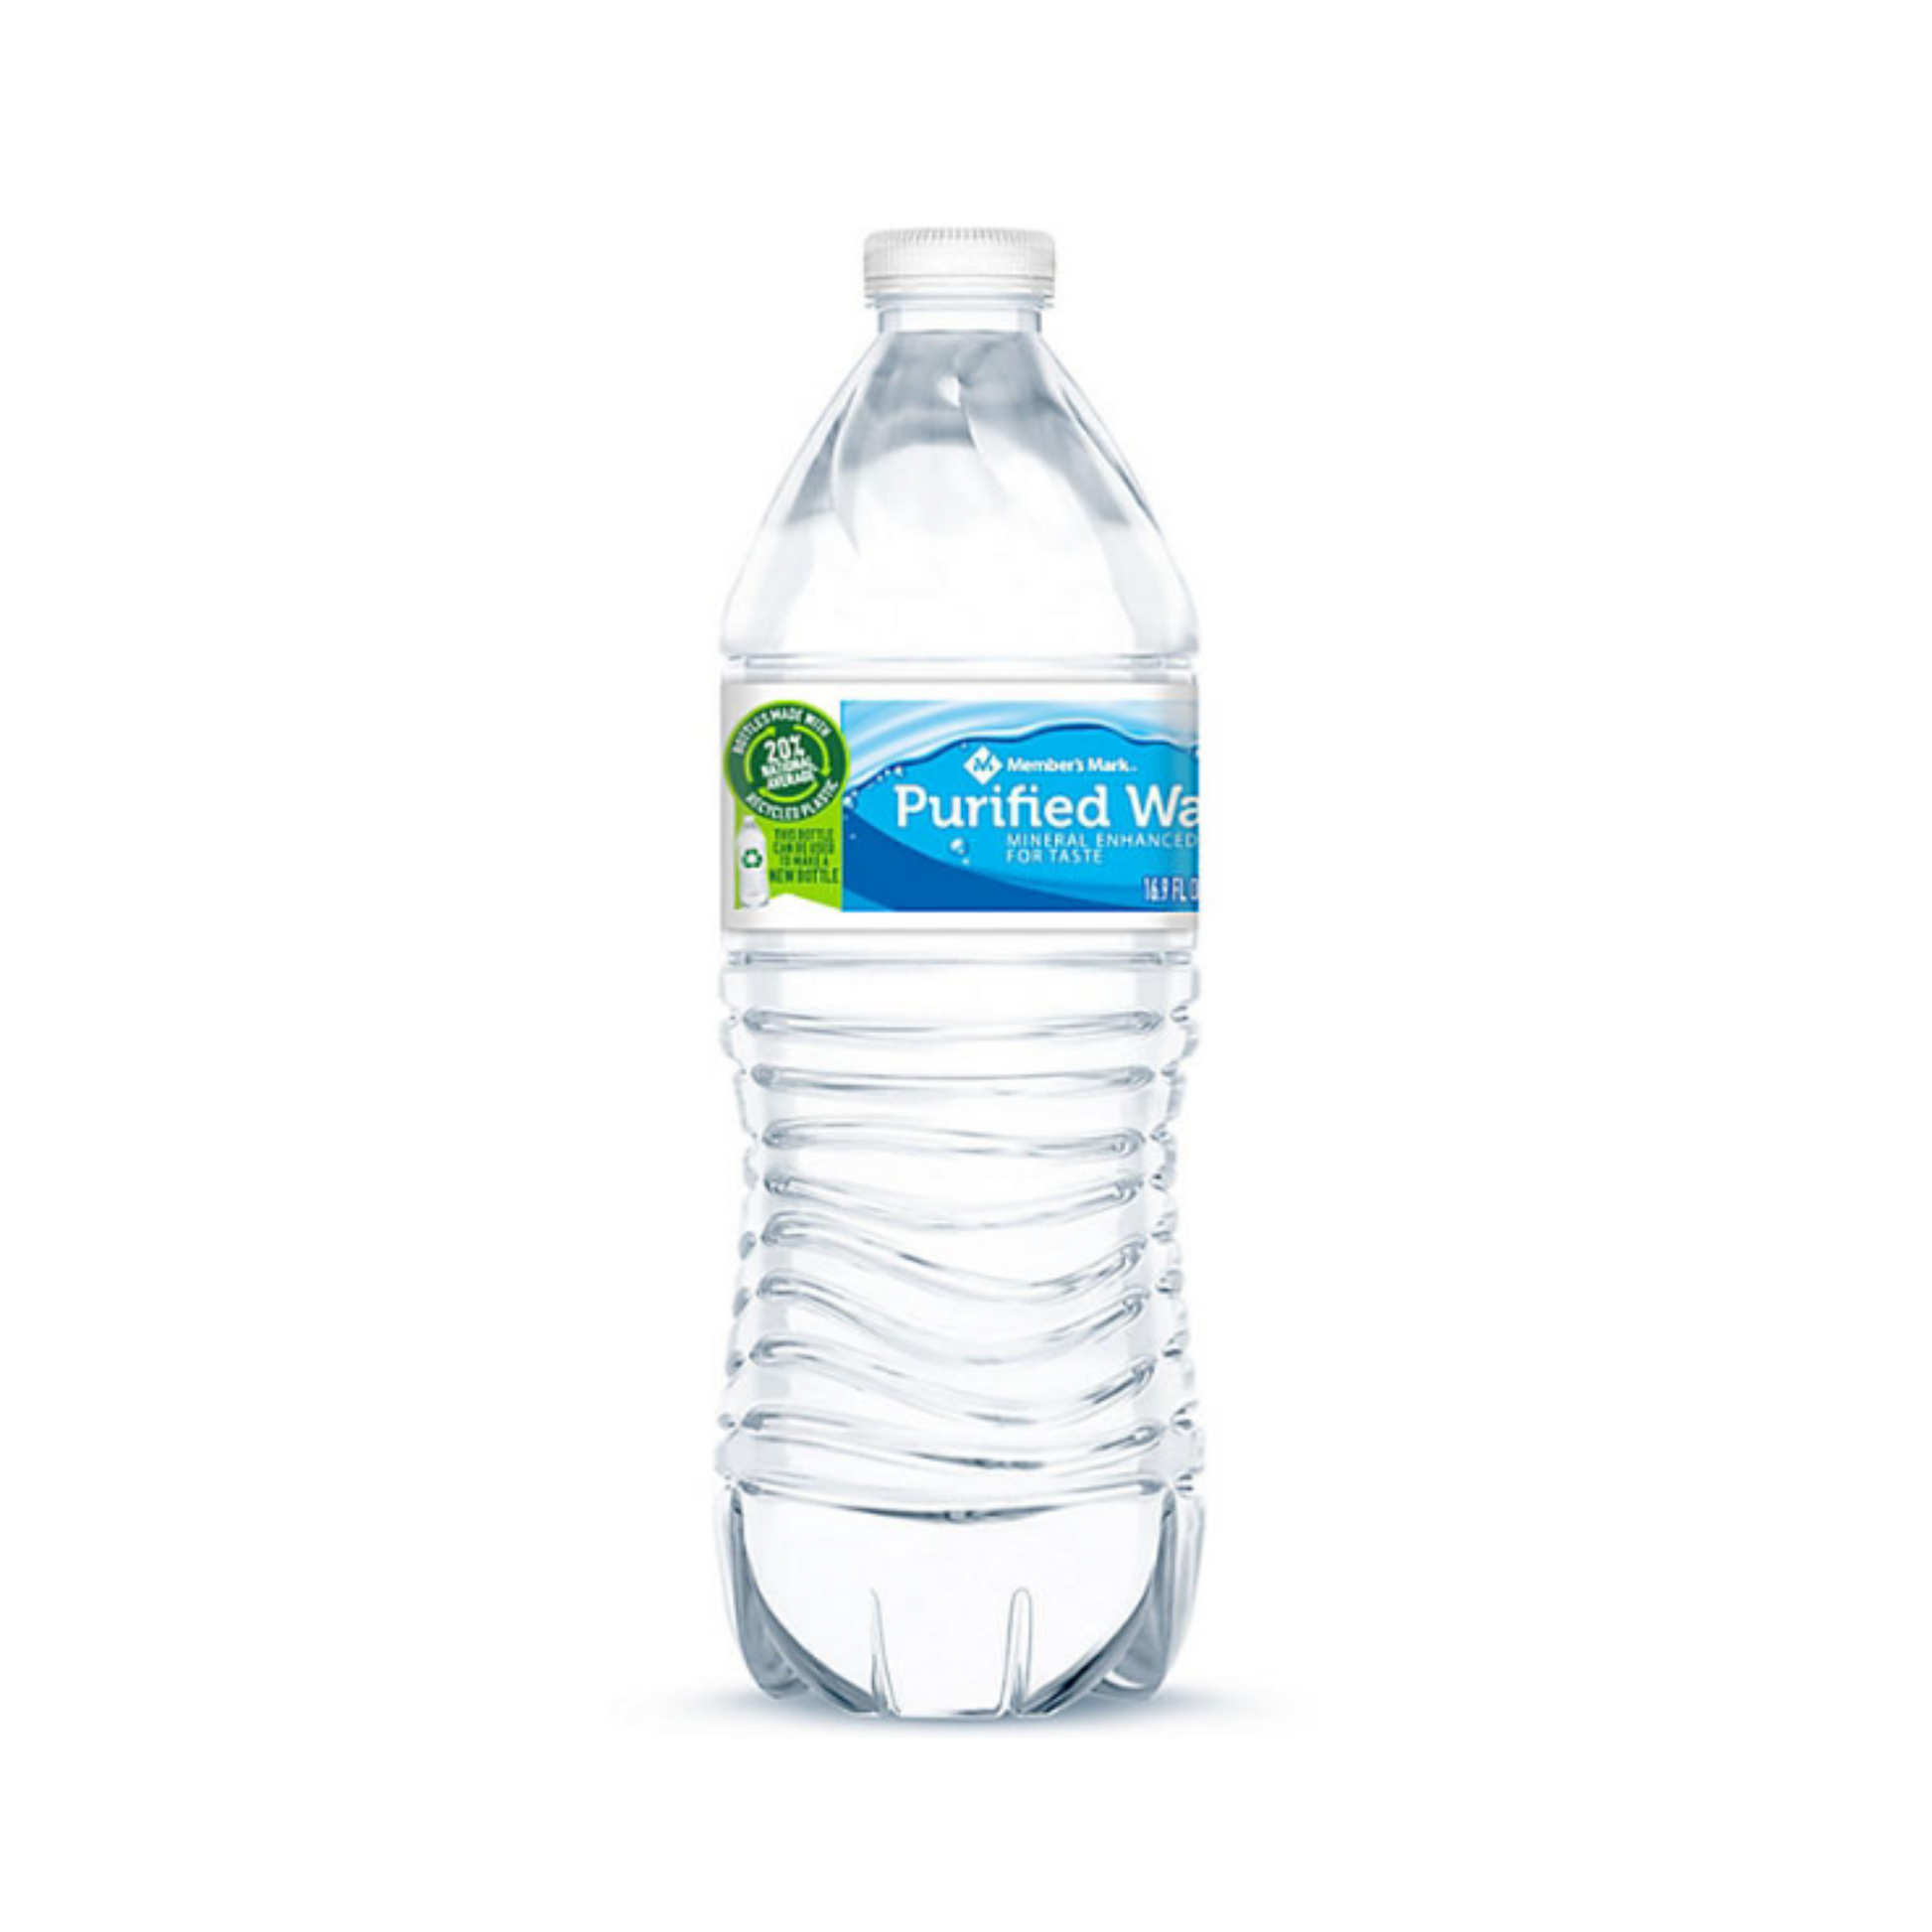 Stock up on purified water with our convenient 40-pack of 16.9 oz bottles